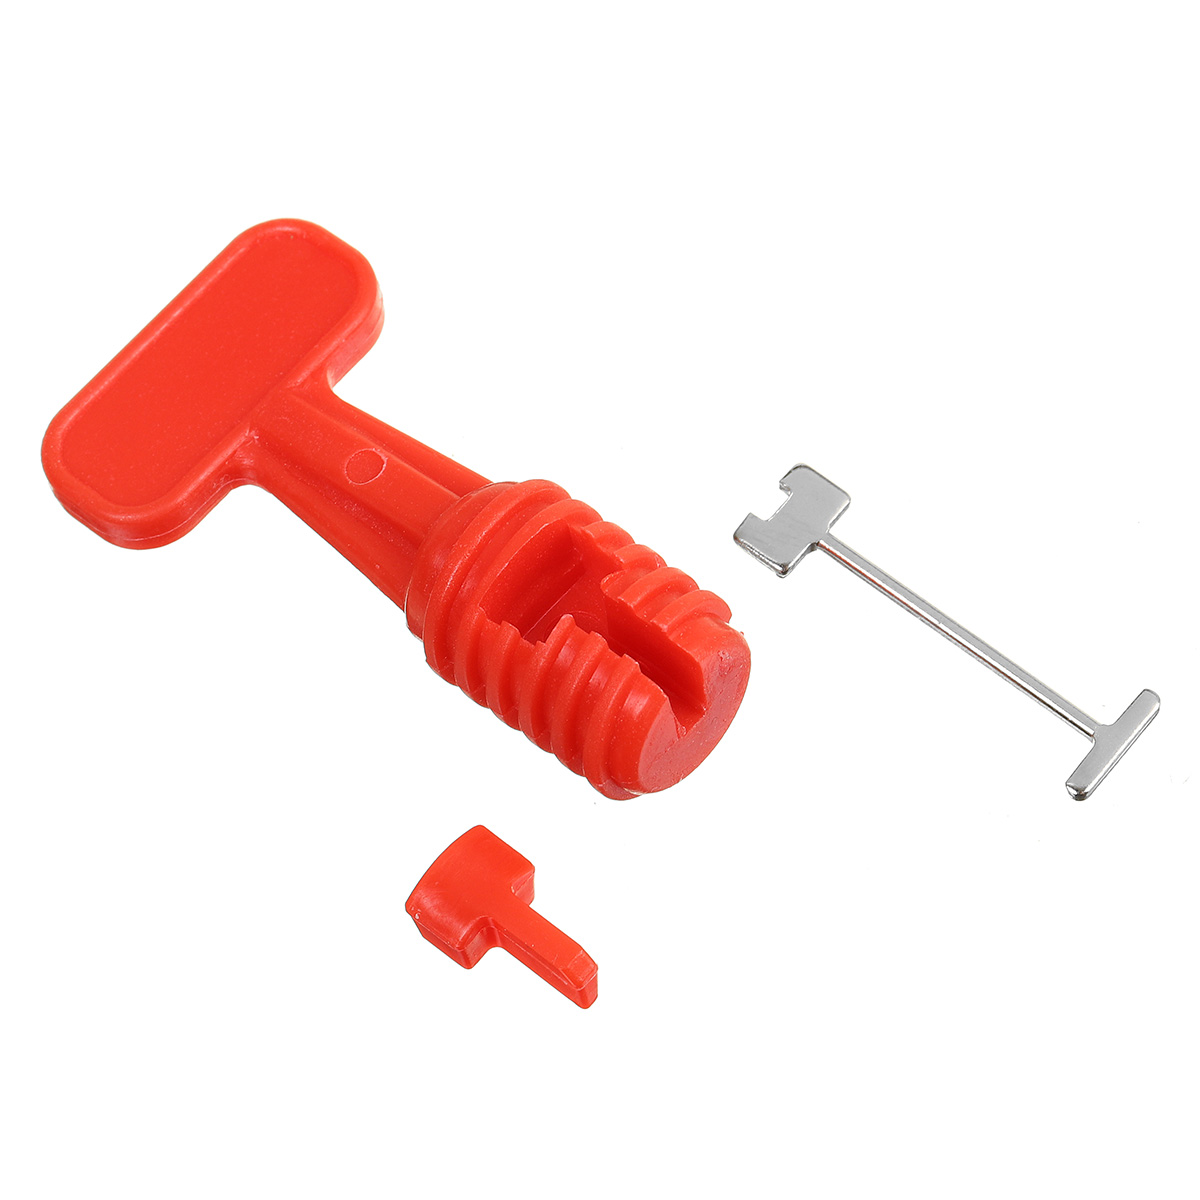 76102201303Pcs-Tile-Leveling-System-Tool-Ceramic-Tile-Locator-Level-Wedges-Alignment-Spacers-for-Lev-1770915-10